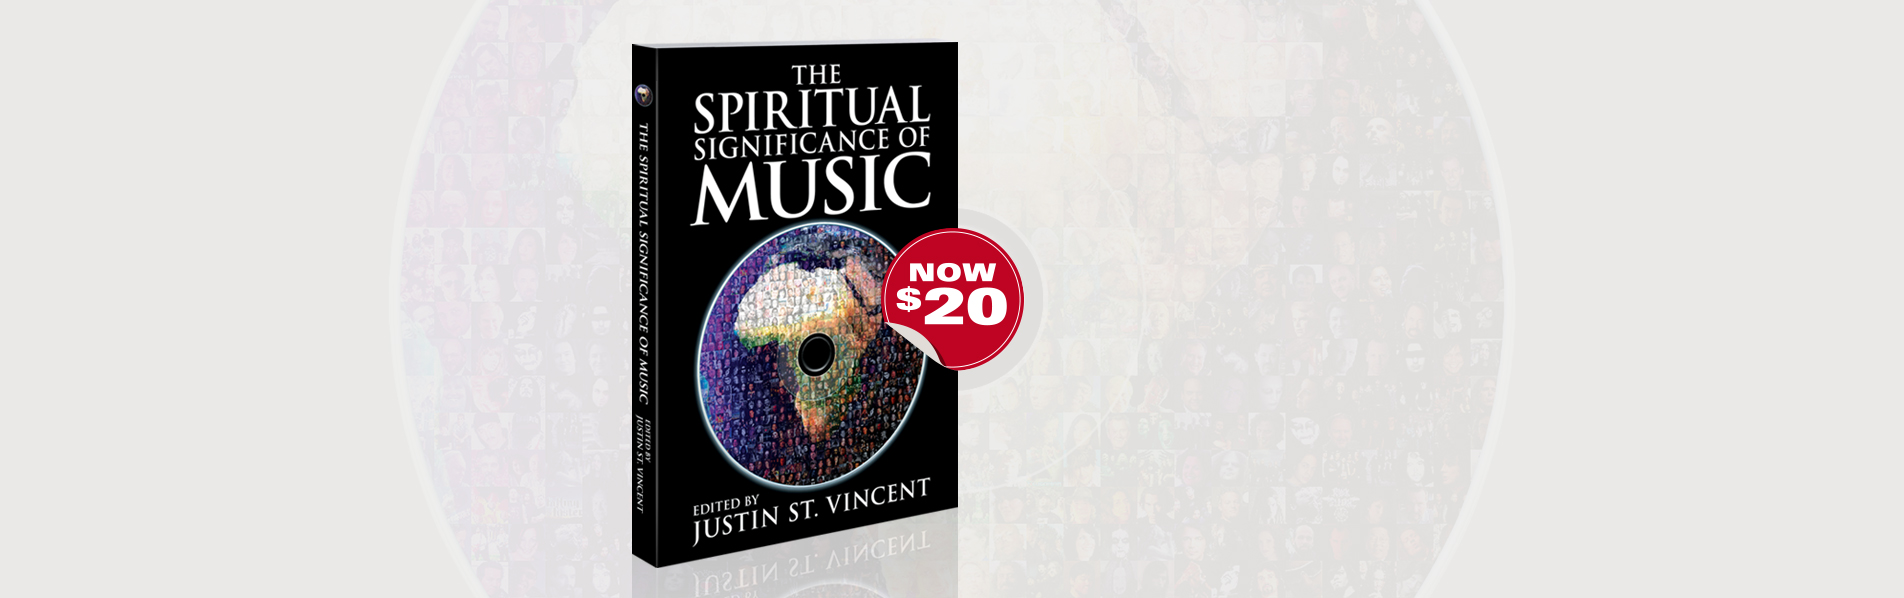 The Spiritual Significance of Music